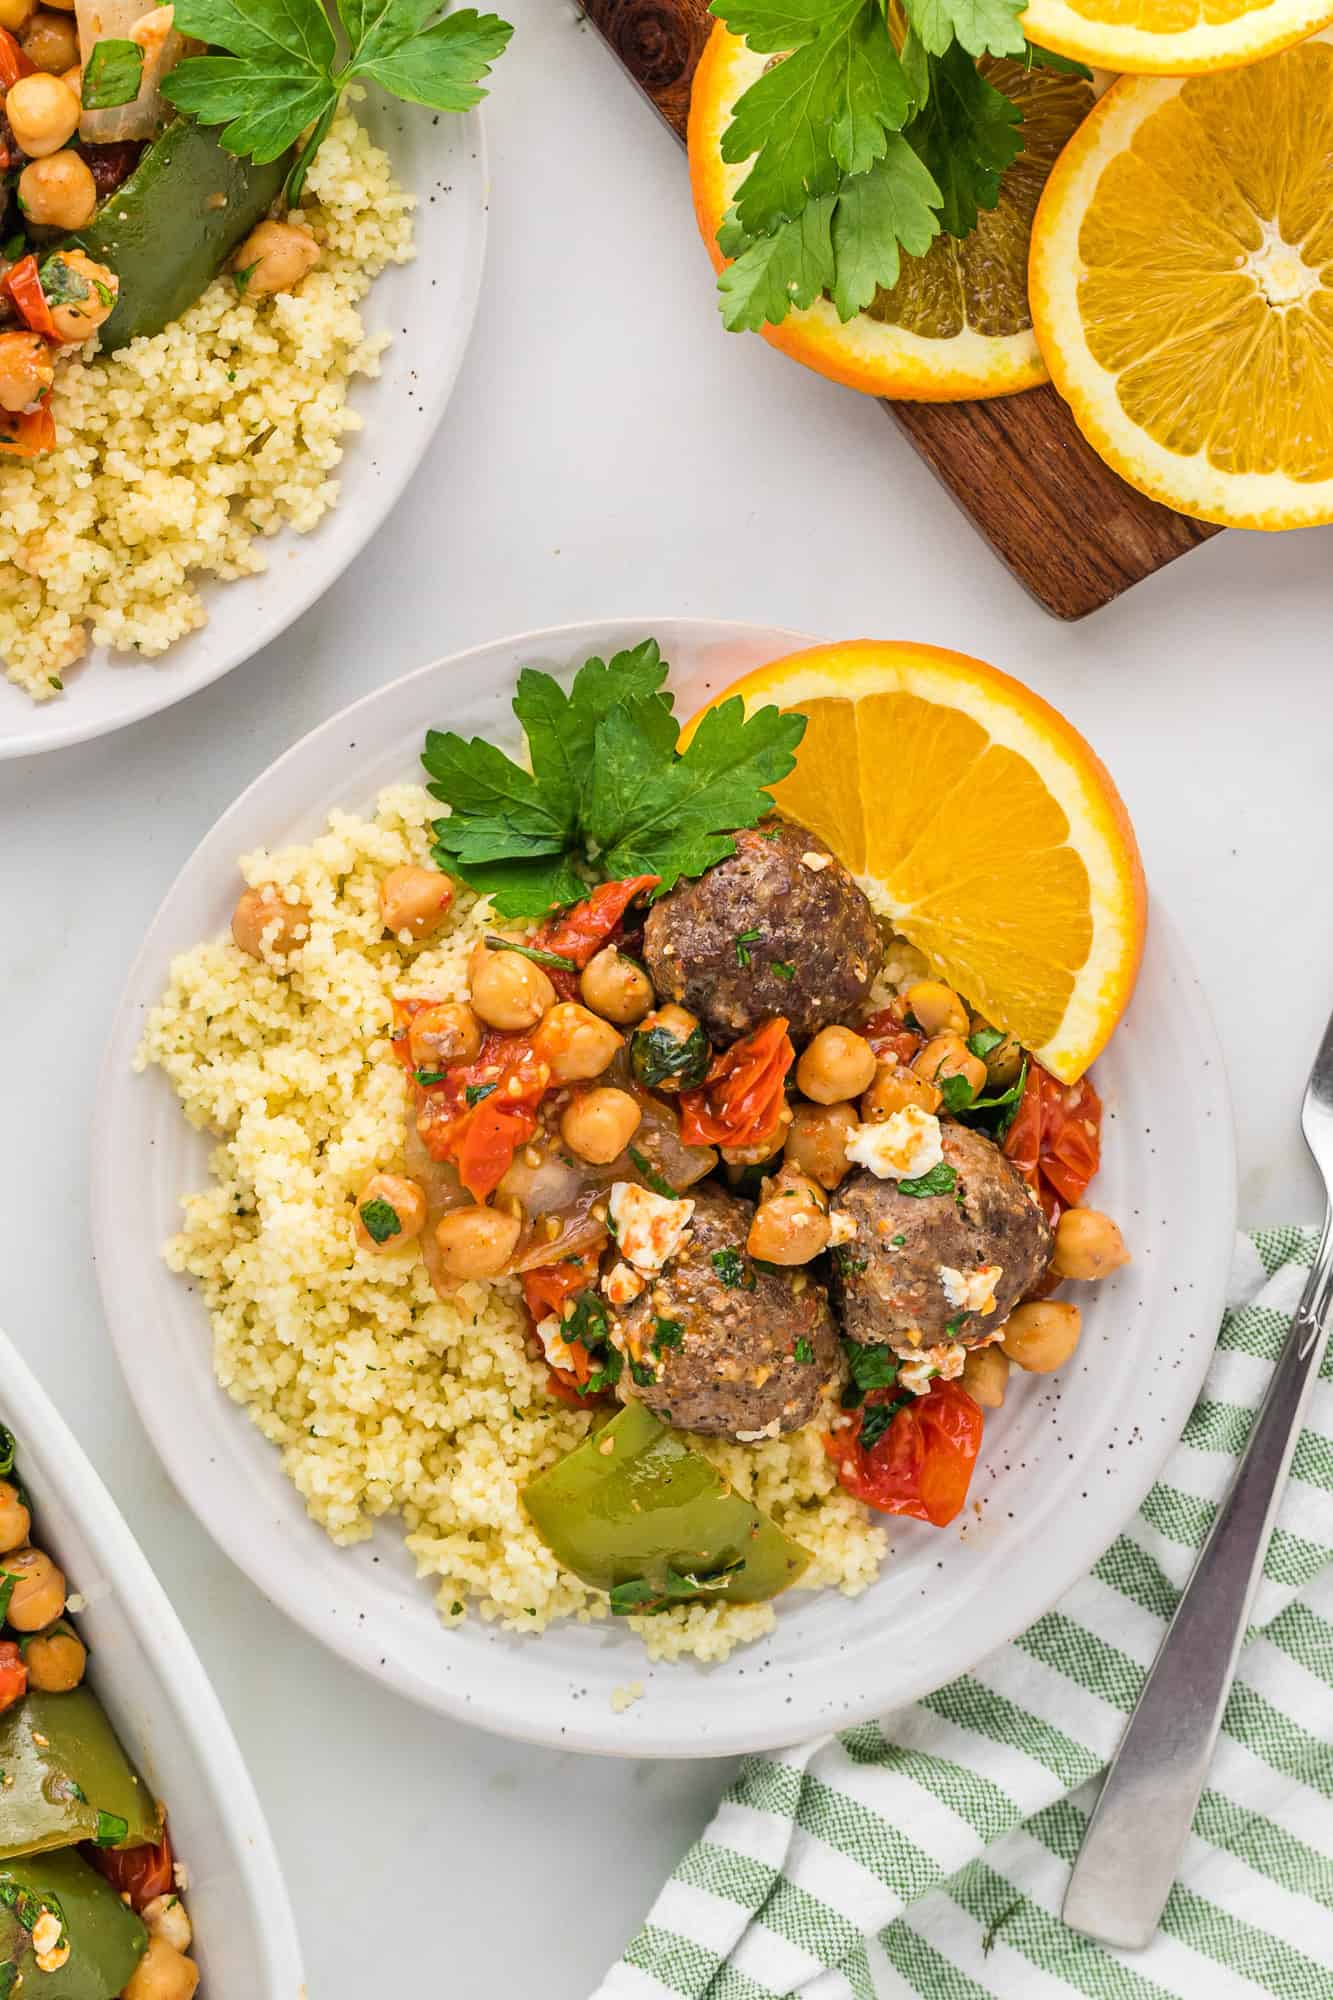 Plated Moroccan meatballs with chickpeas and tomatoes.